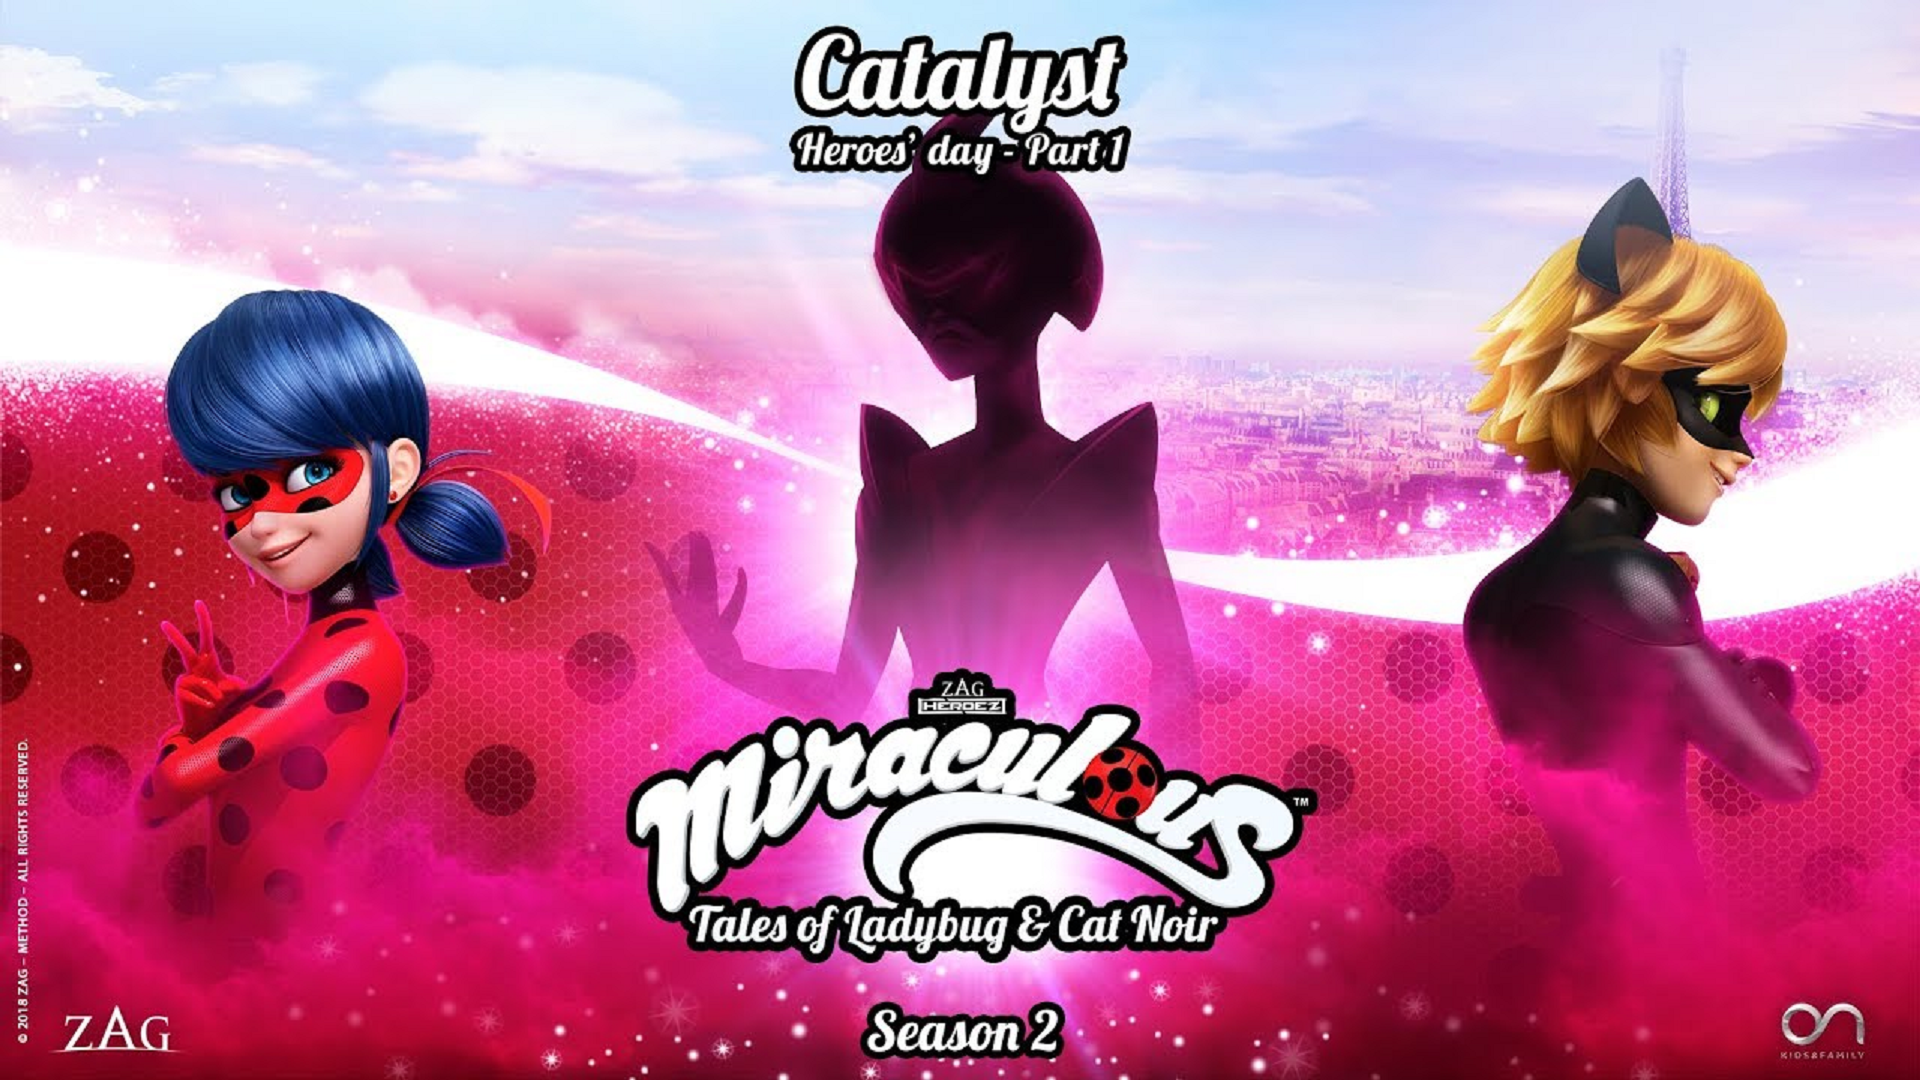 Catalyst Heroes Day Part 1 Miraculous Ladybug Wiki